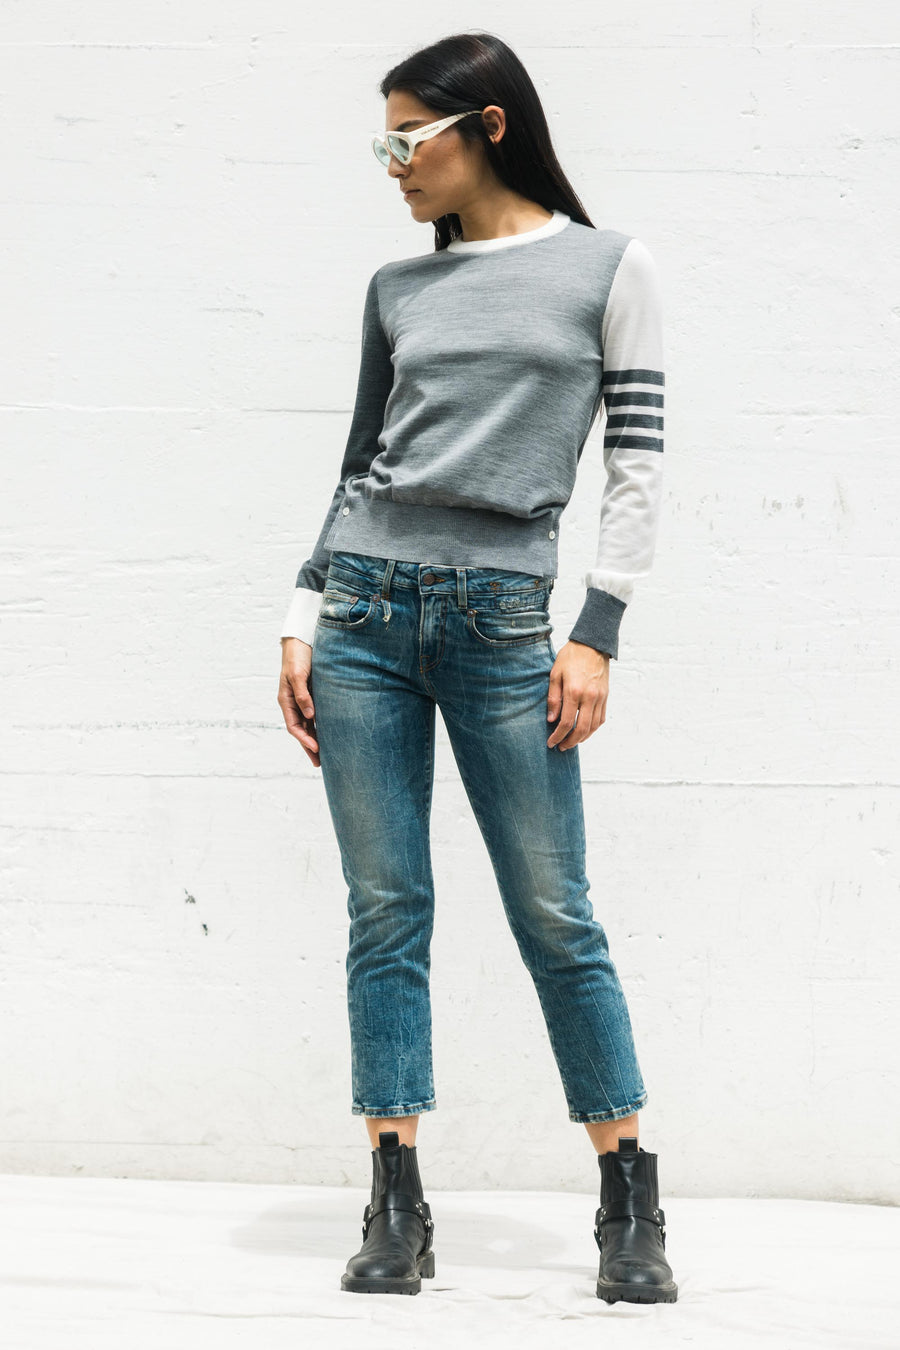 Fun Mix Relaxed Fit Crew Neck in Grey